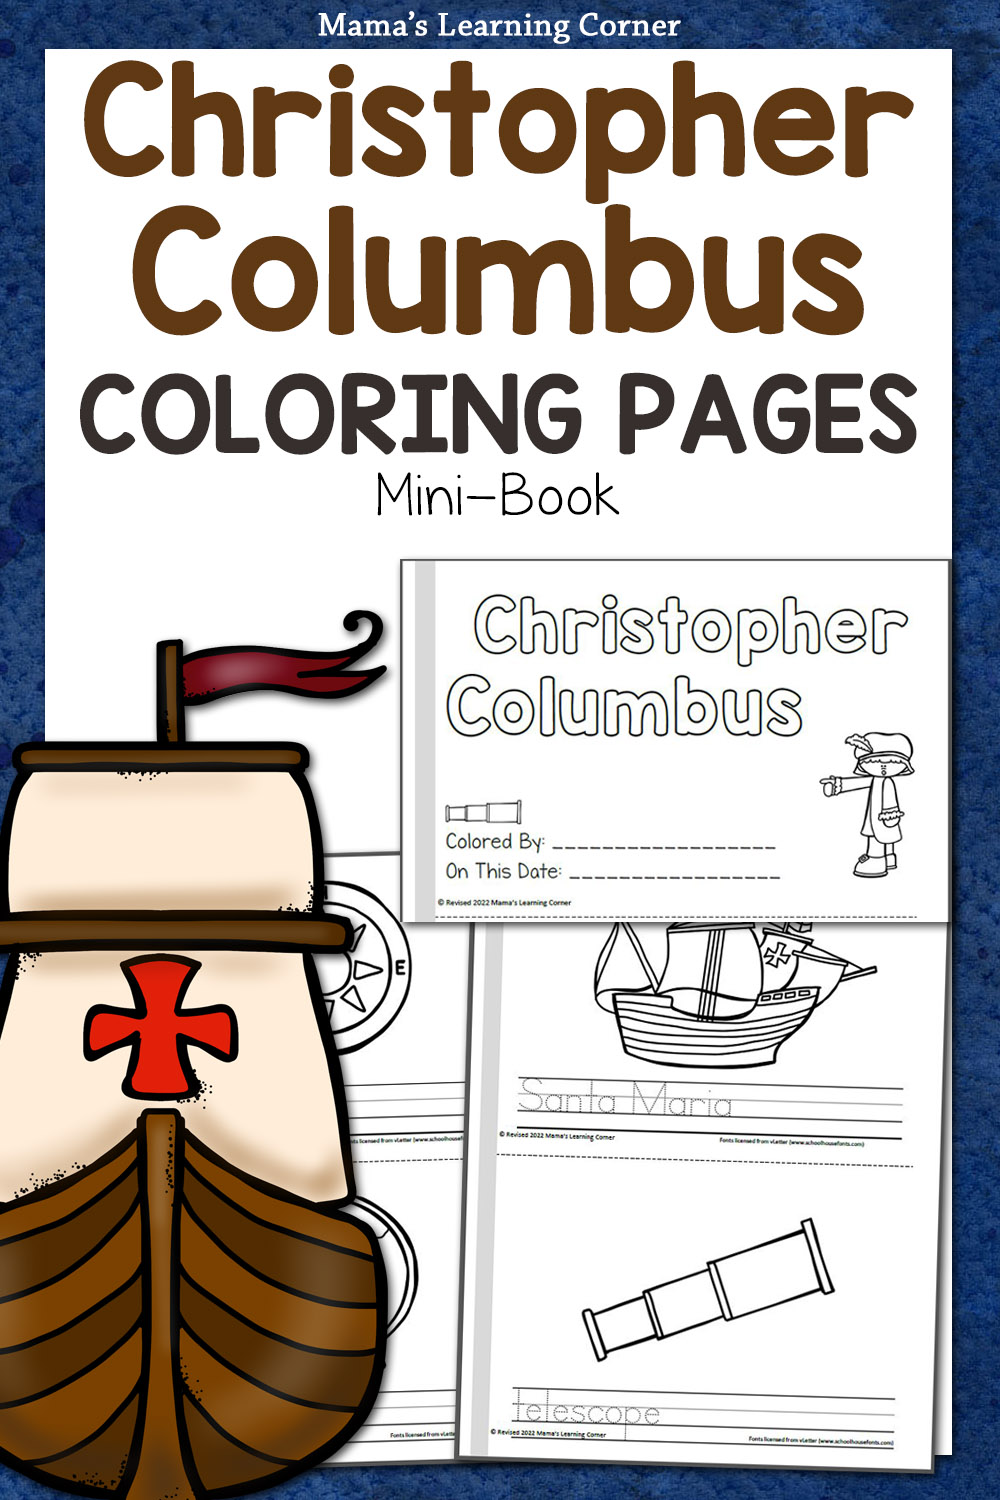 coloring-pages-of-christopher-columbus-home-design-ideas